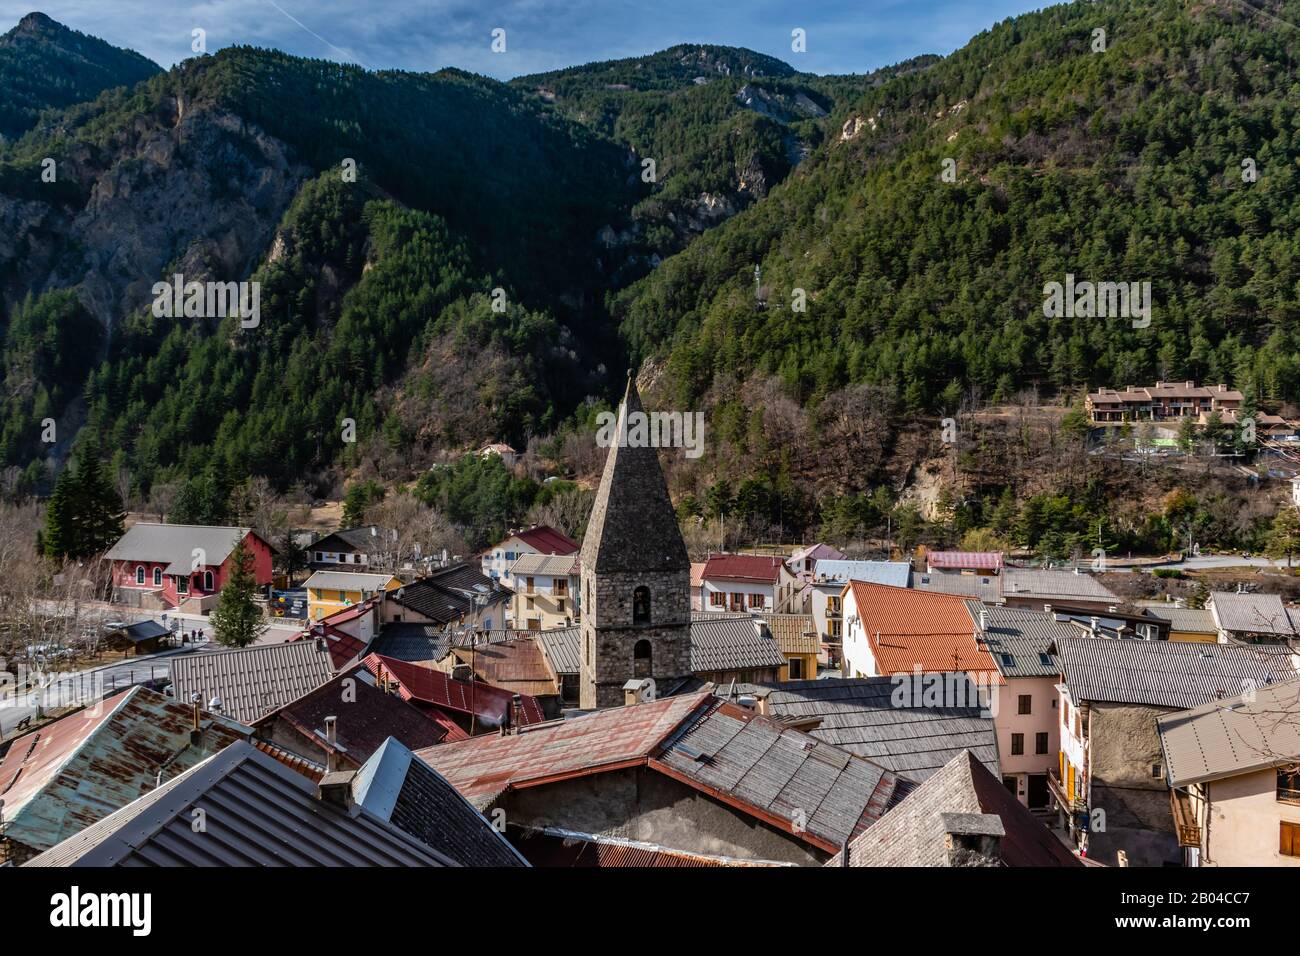 Guillaumes, France - February 16, 2020: The view of a small French town/village Guillaumes located in the Alps mountains on a sunny day Stock Photo